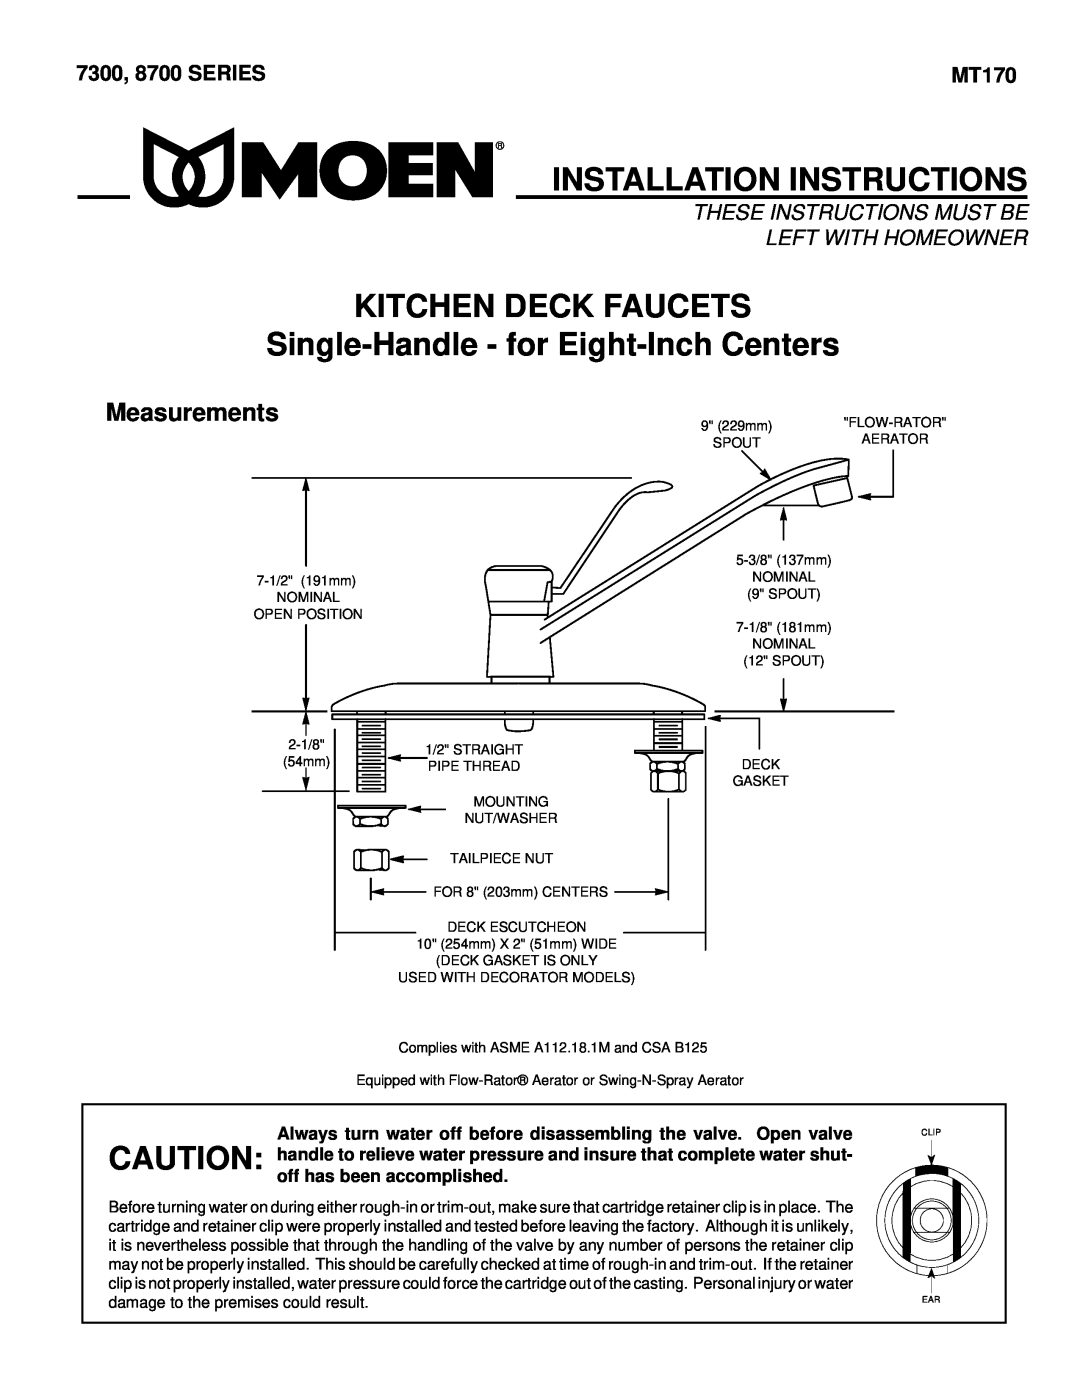 Moen 7300 installation instructions Installation Instructions, Kitchen Deck Faucets, Single-Handle- for Eight-InchCenters 